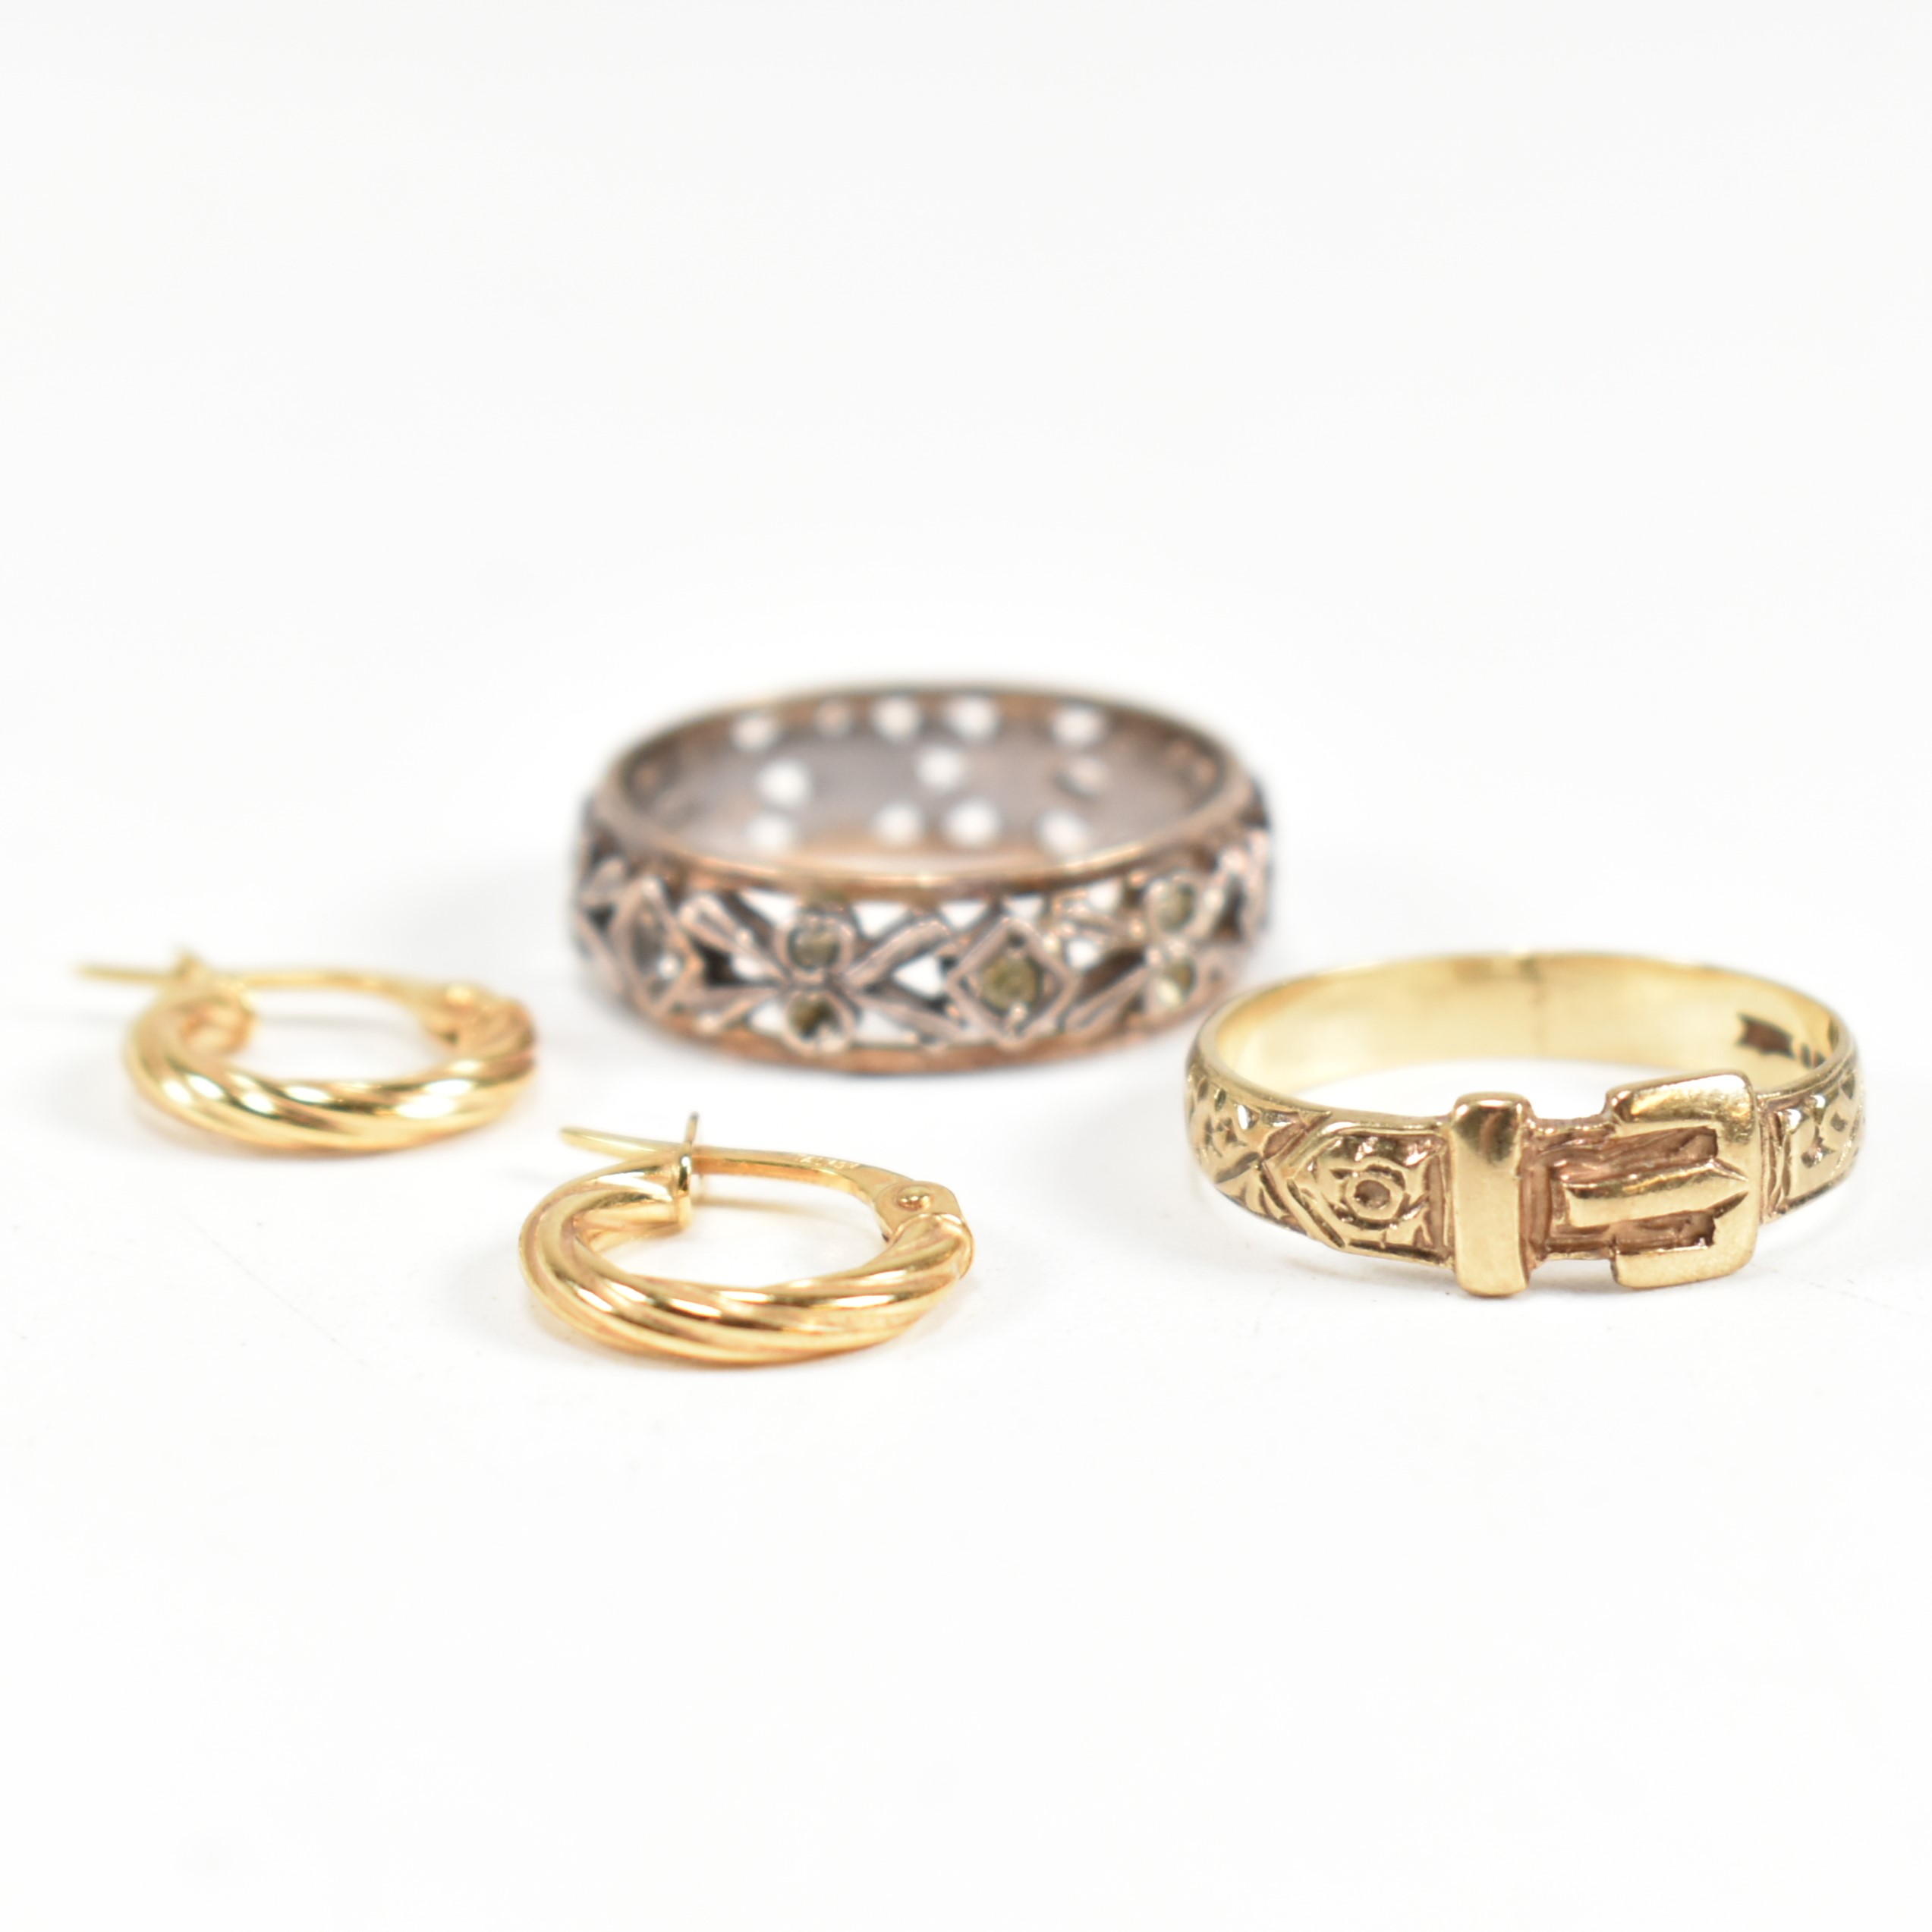 COLLECTION OF 9CT GOLD JEWELLERY INCLUDING GOLD & SILVER ETERNITY RING - Image 5 of 13